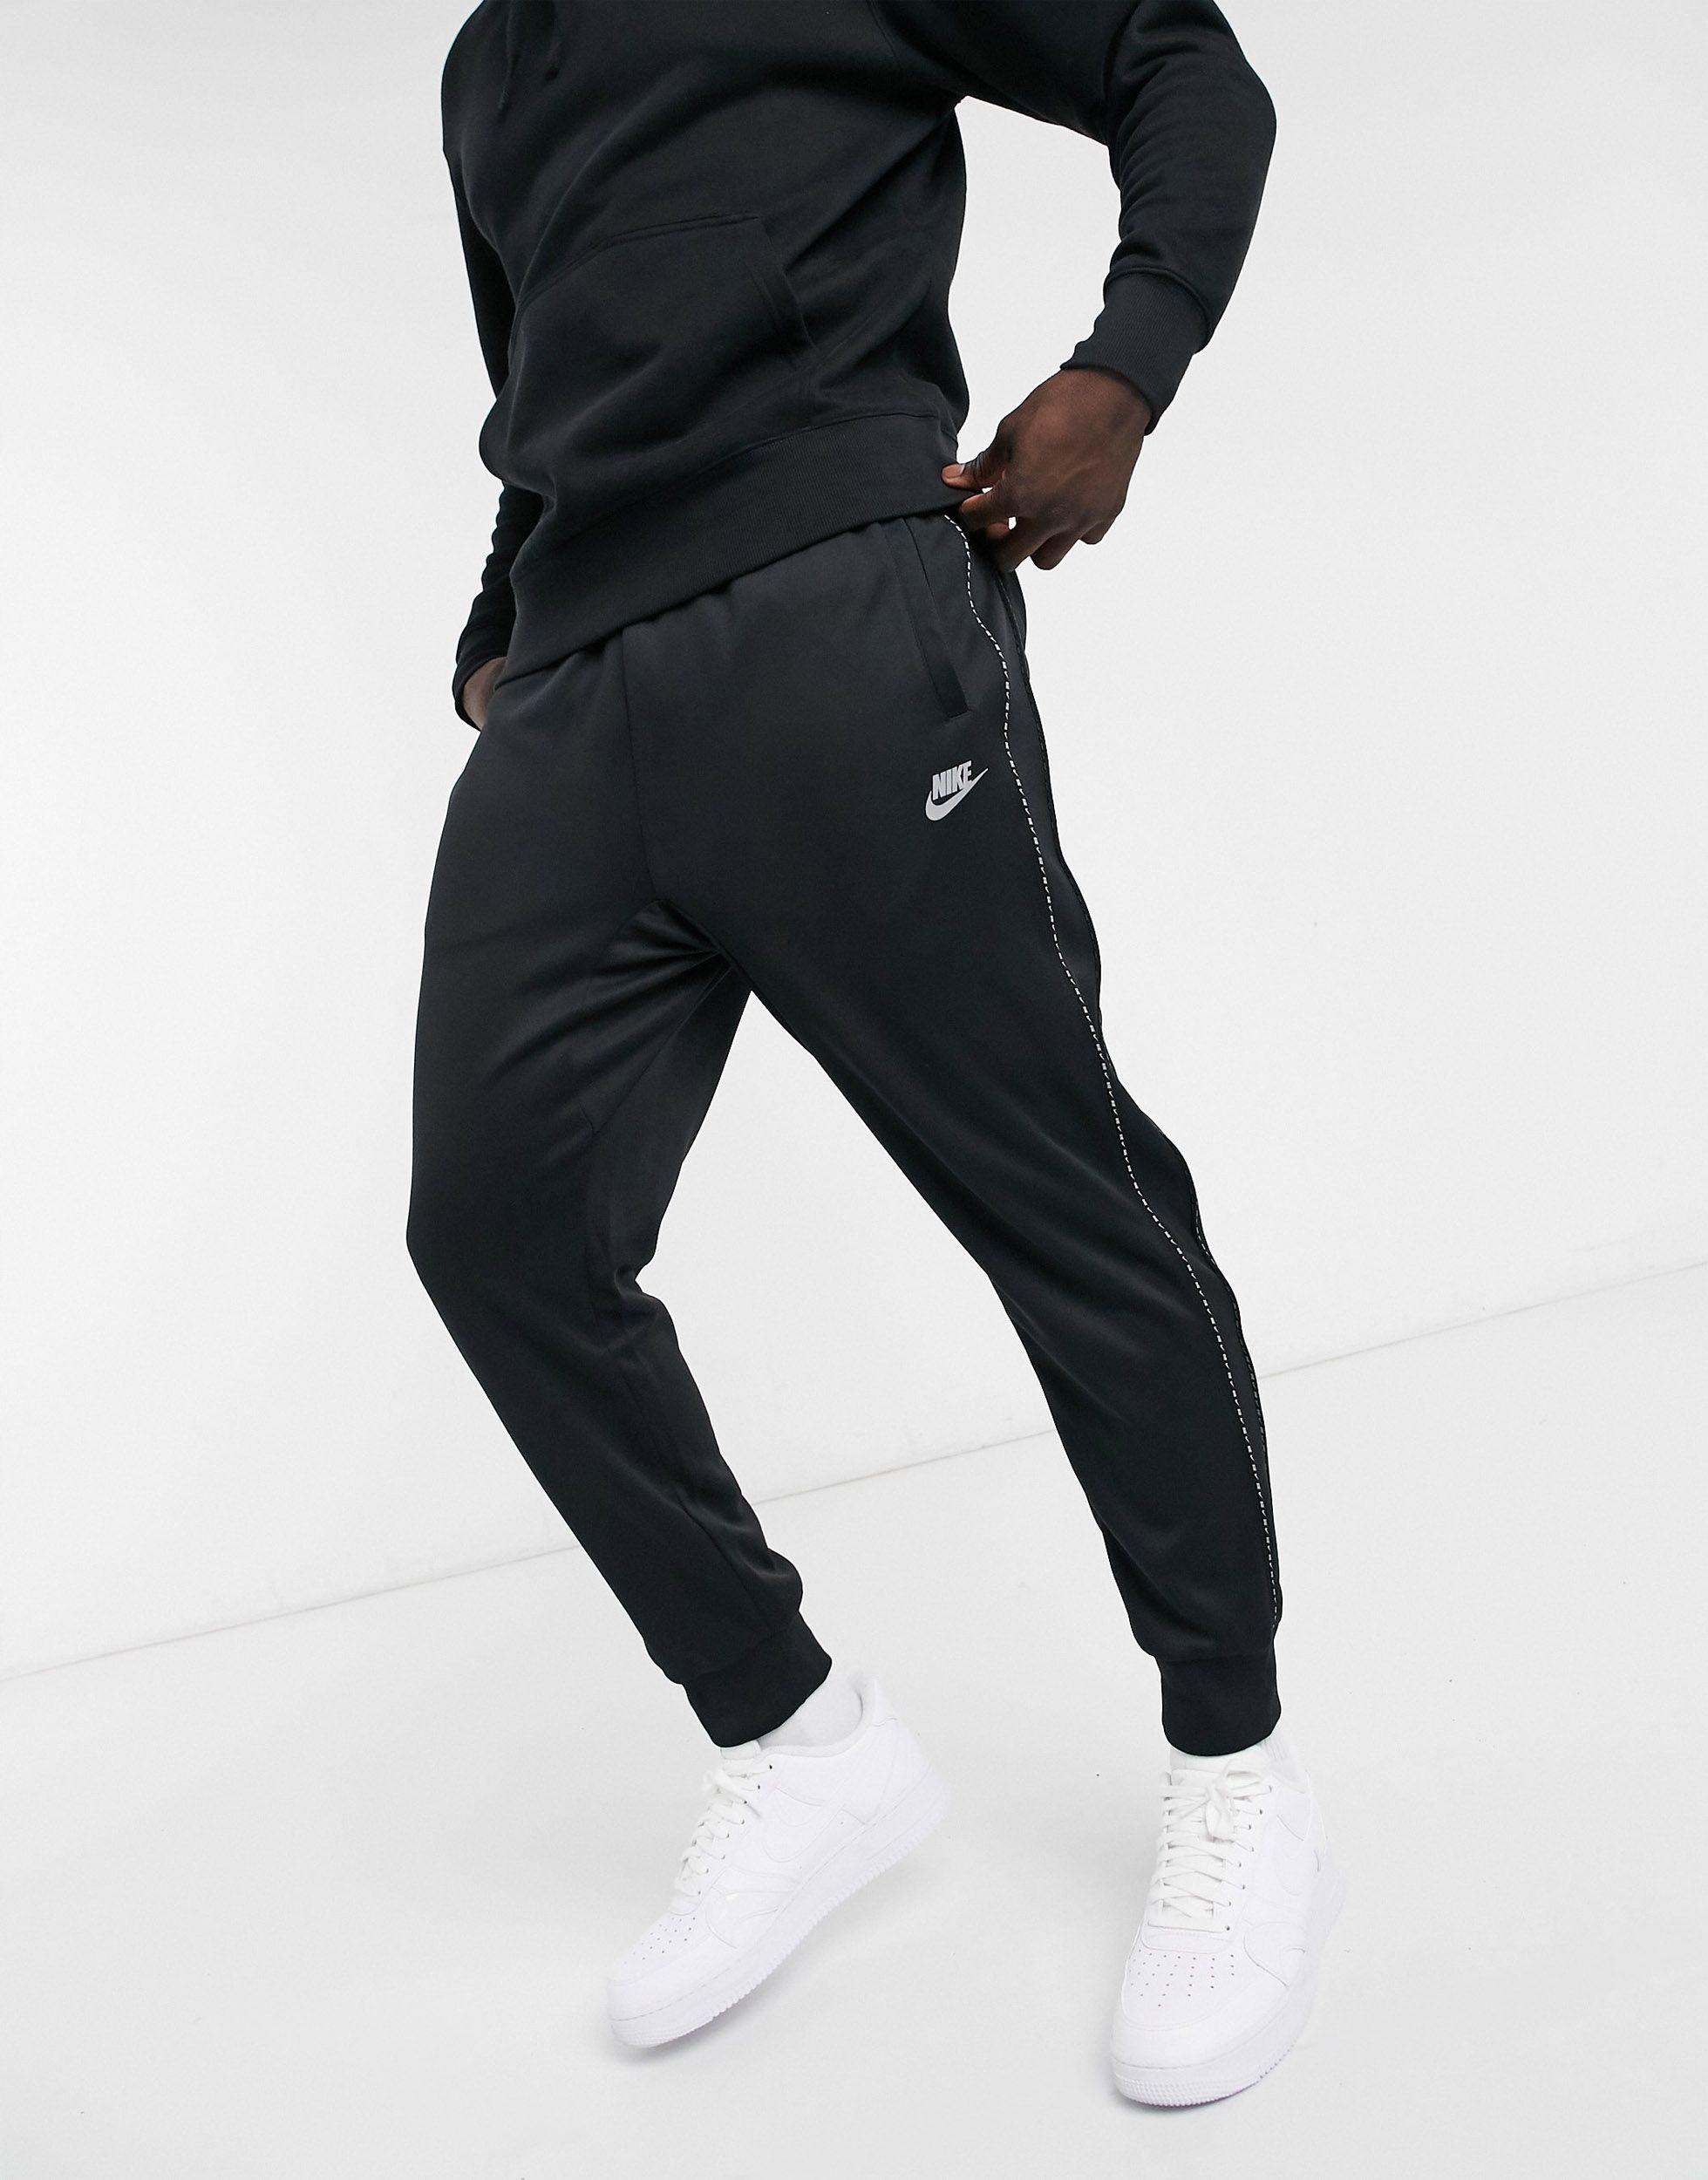 Nike Repeat Pack Logo Taping Polyknit Cuffed joggers in Black for Men - Lyst